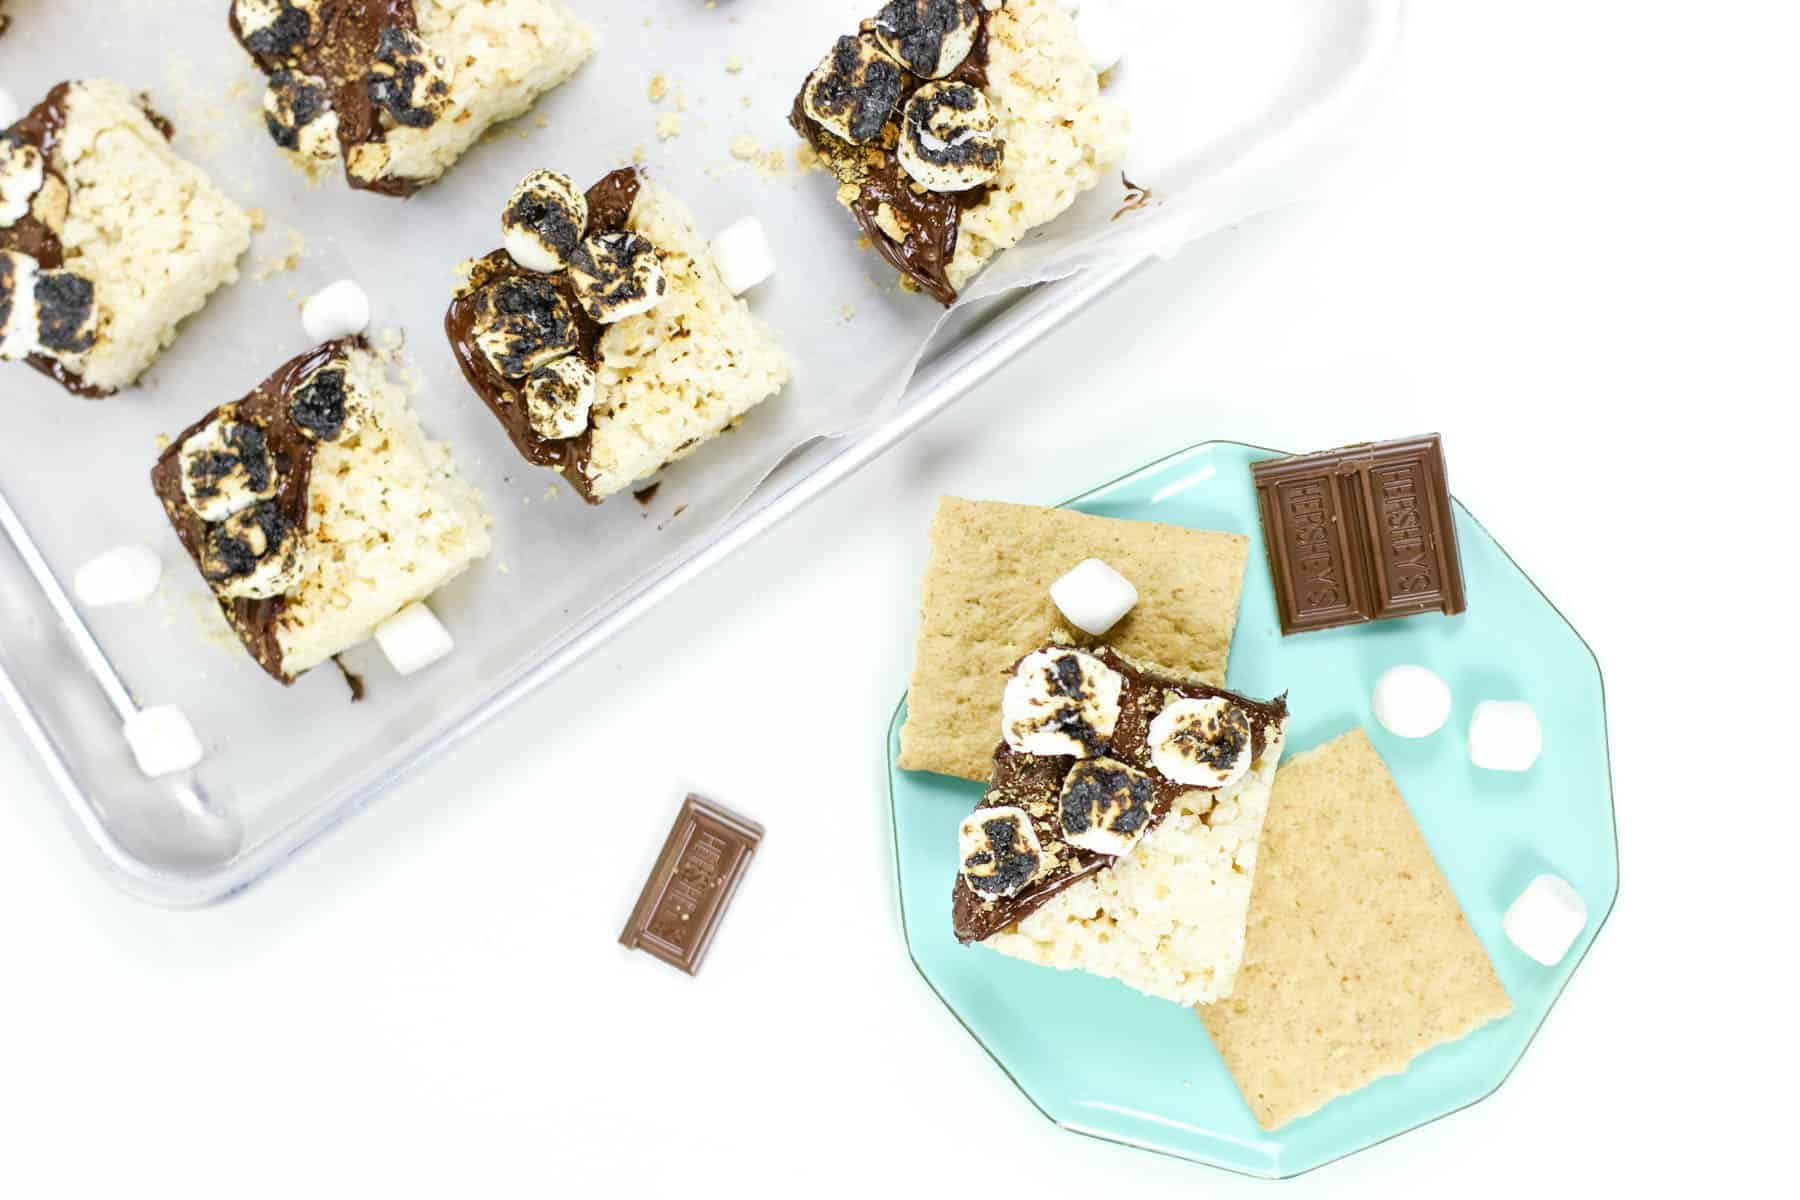 A tray of s'mores rice krispie treats next to a plate of the same. Each treat is dipped diagonally in chocolate and covered in toasted mini marshmallows and graham cracker crumbs.